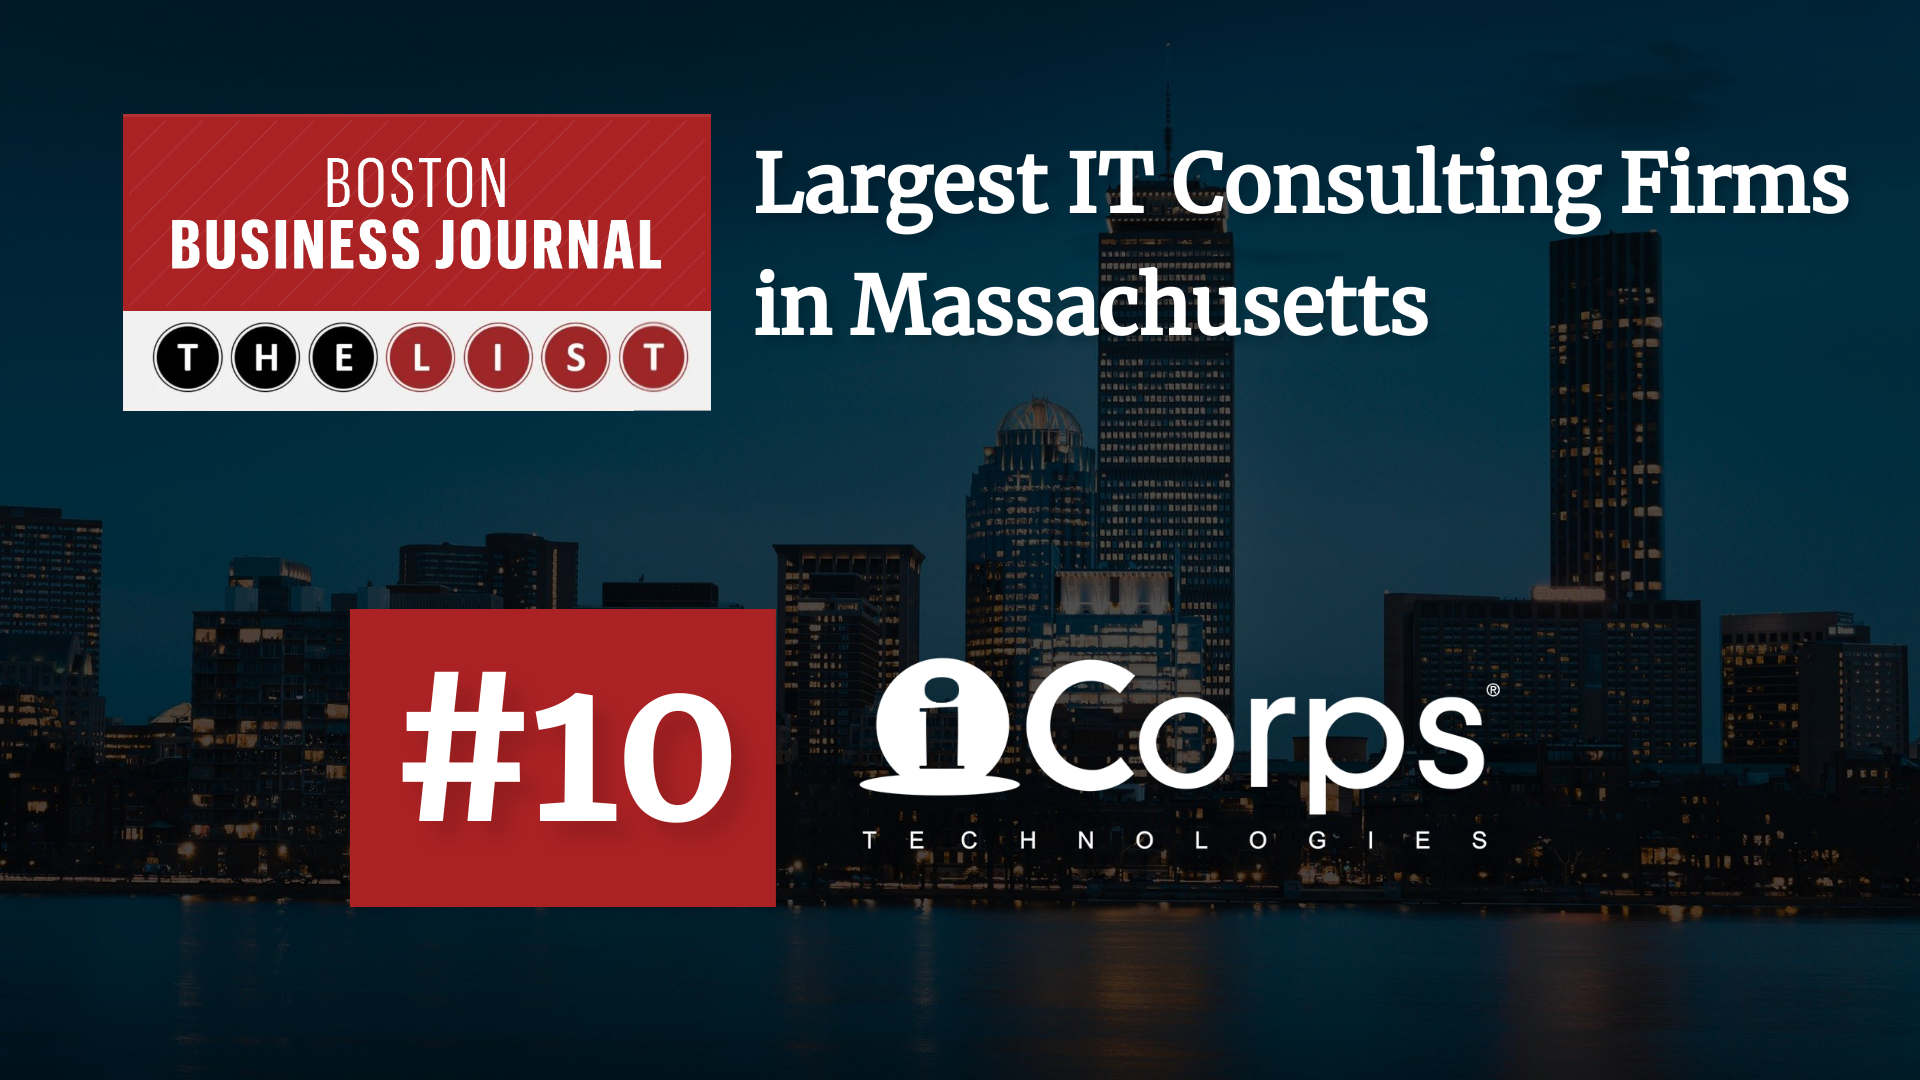 iCorps Ranks #10 Among Largest IT Consulting Firms in MA